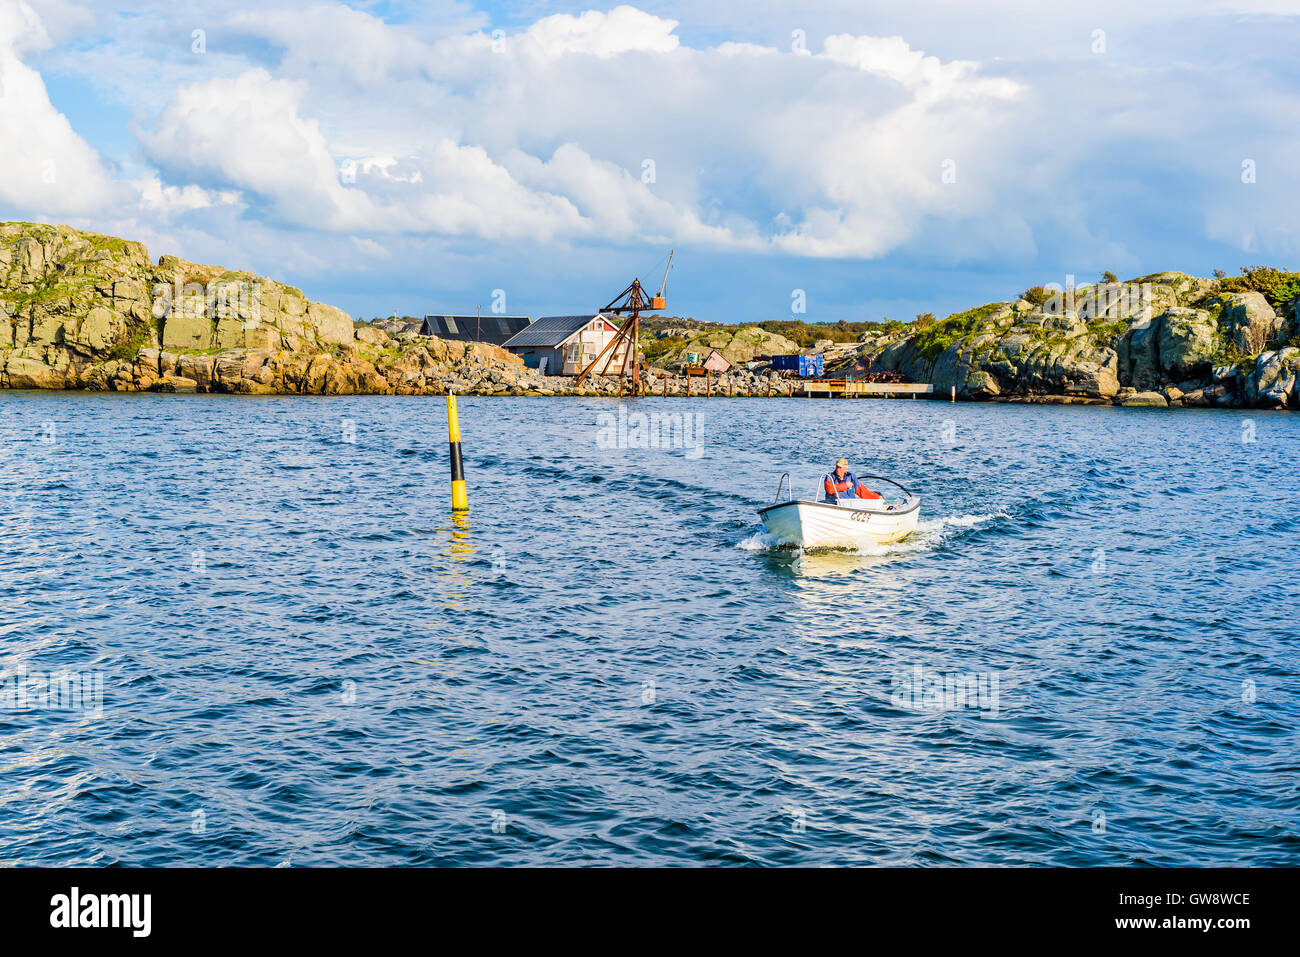 Marstrand, Sweden - September 8, 2016: Male fisherman arriving in small open motorboat going around a navigational marker toward Stock Photo